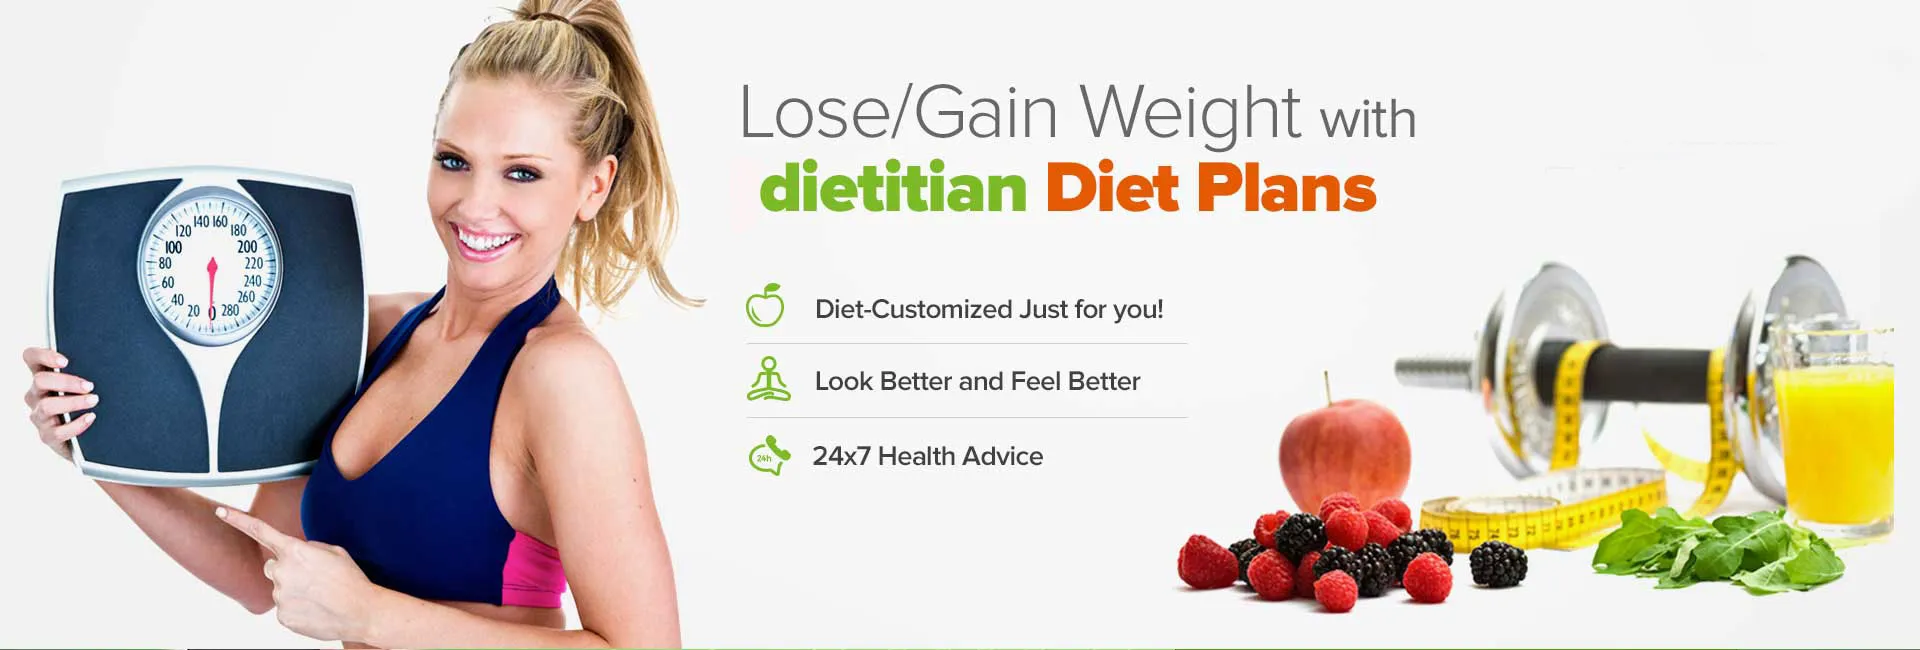 Diet Plan For Weight Loss In St. John's